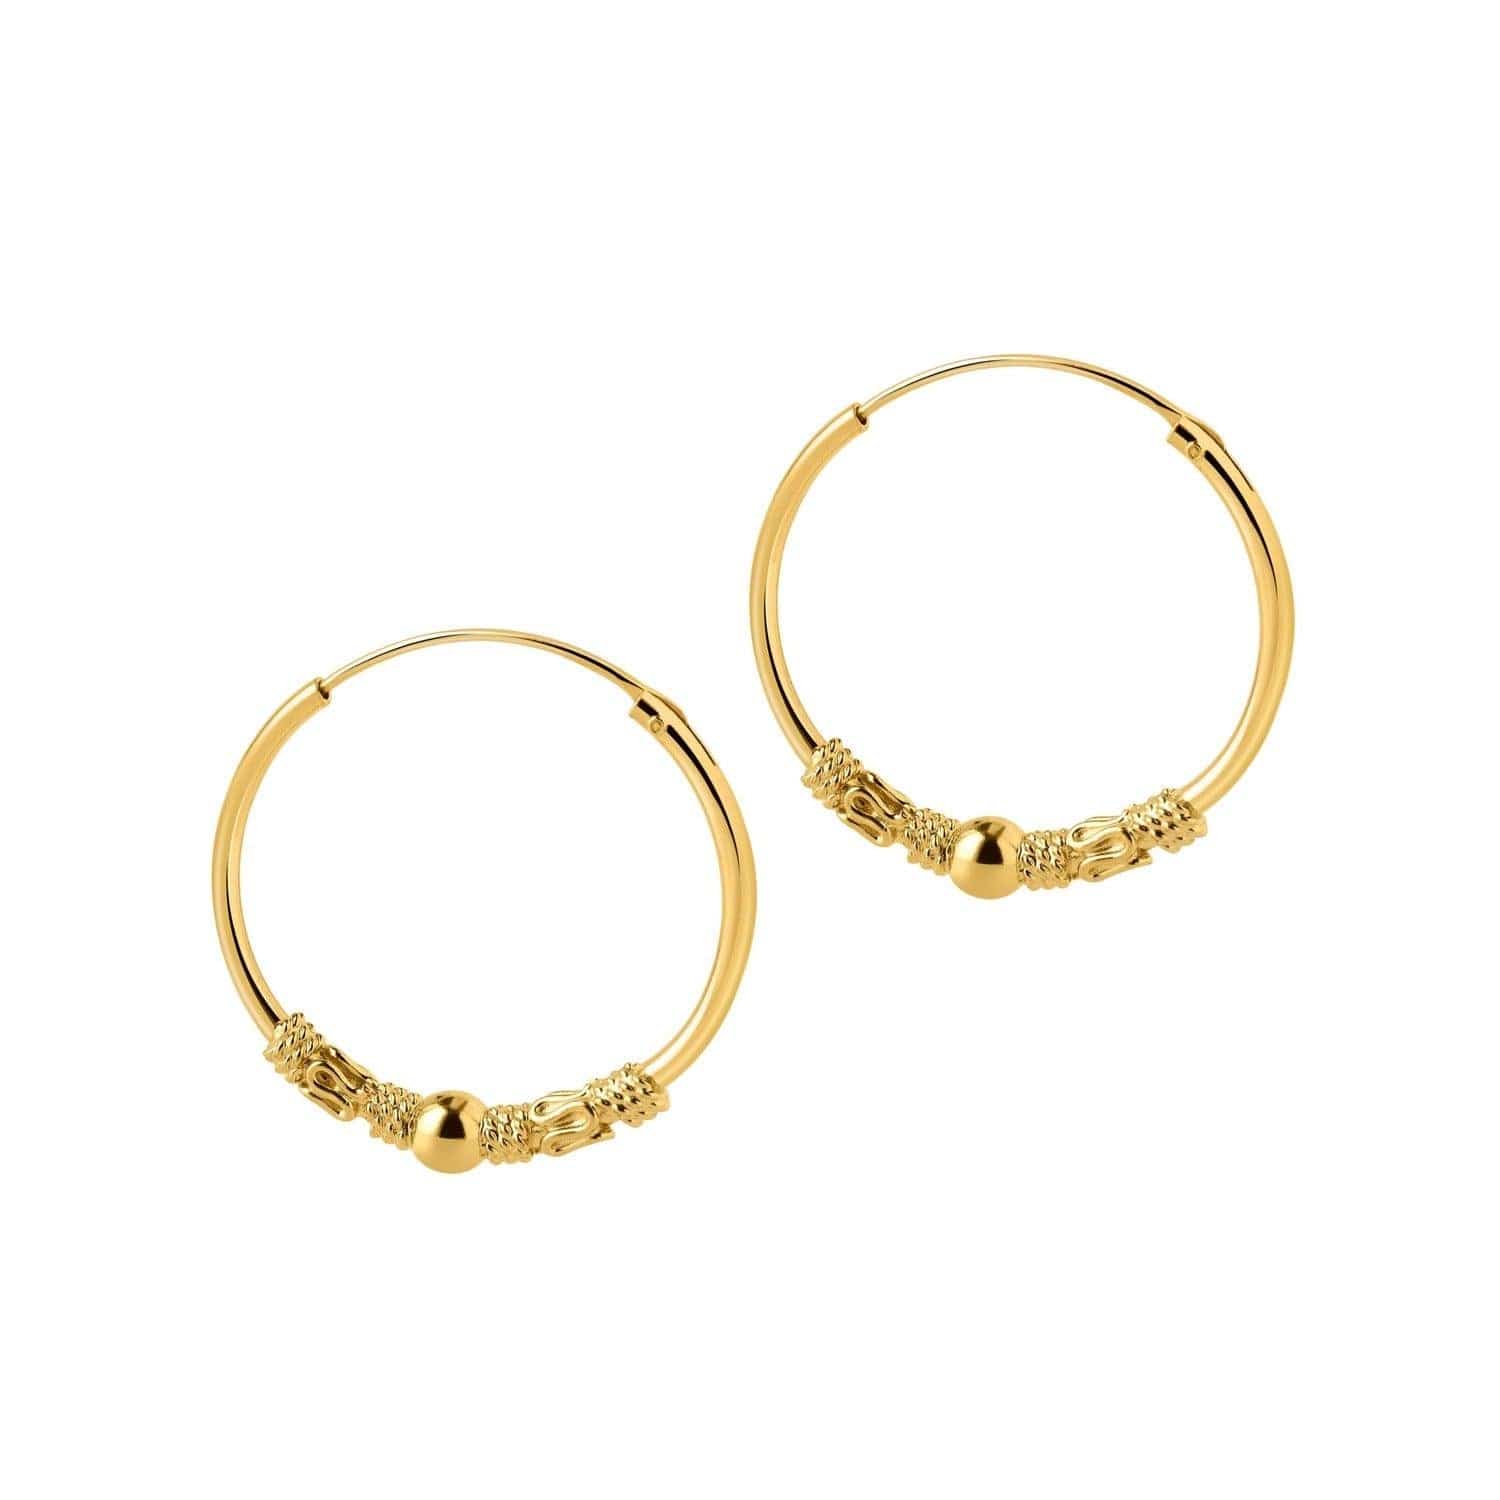 Gold plated Bali Hoop Earrings Niaga with ball and snake pattern